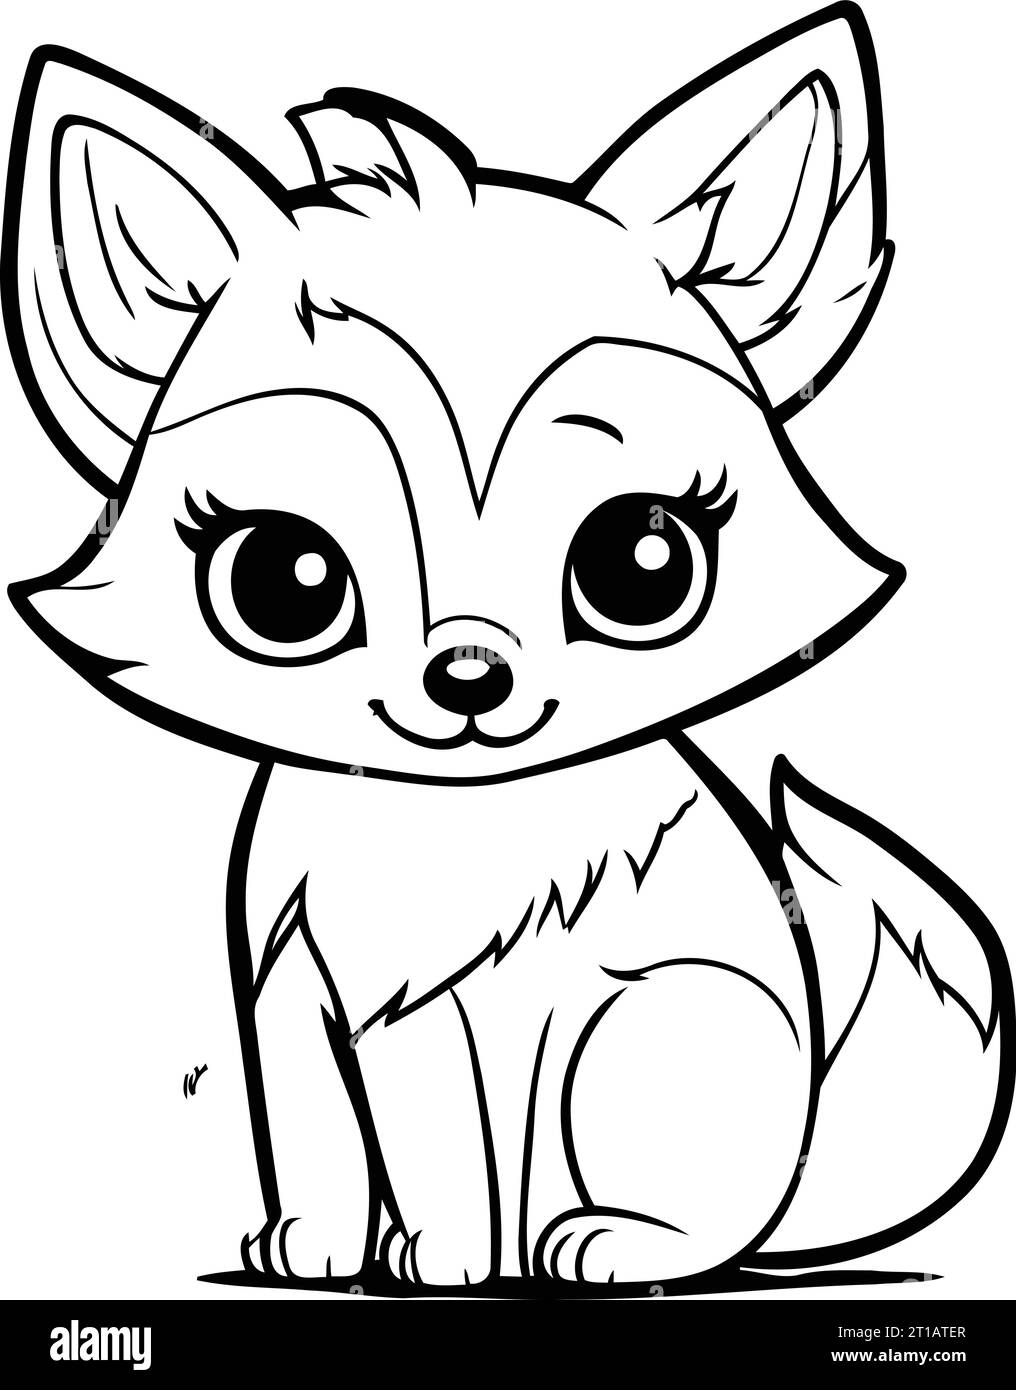 Coloring Page Outline Of Cute Cartoon Fox Animal Coloring Book Stock Vector